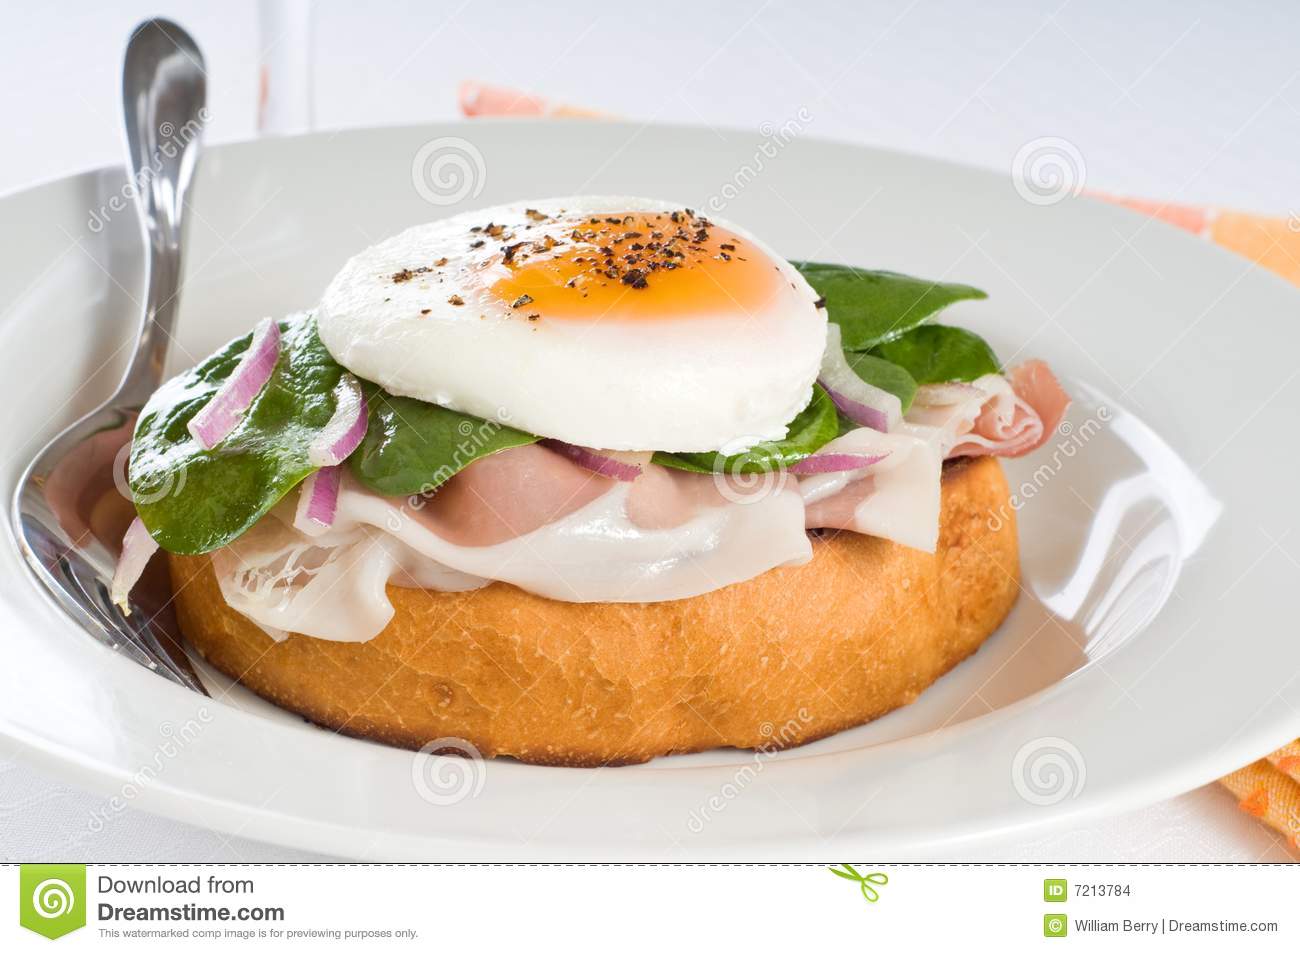 Elegant Breakfast Sandwich Of Poached Egg And Prosciutto 